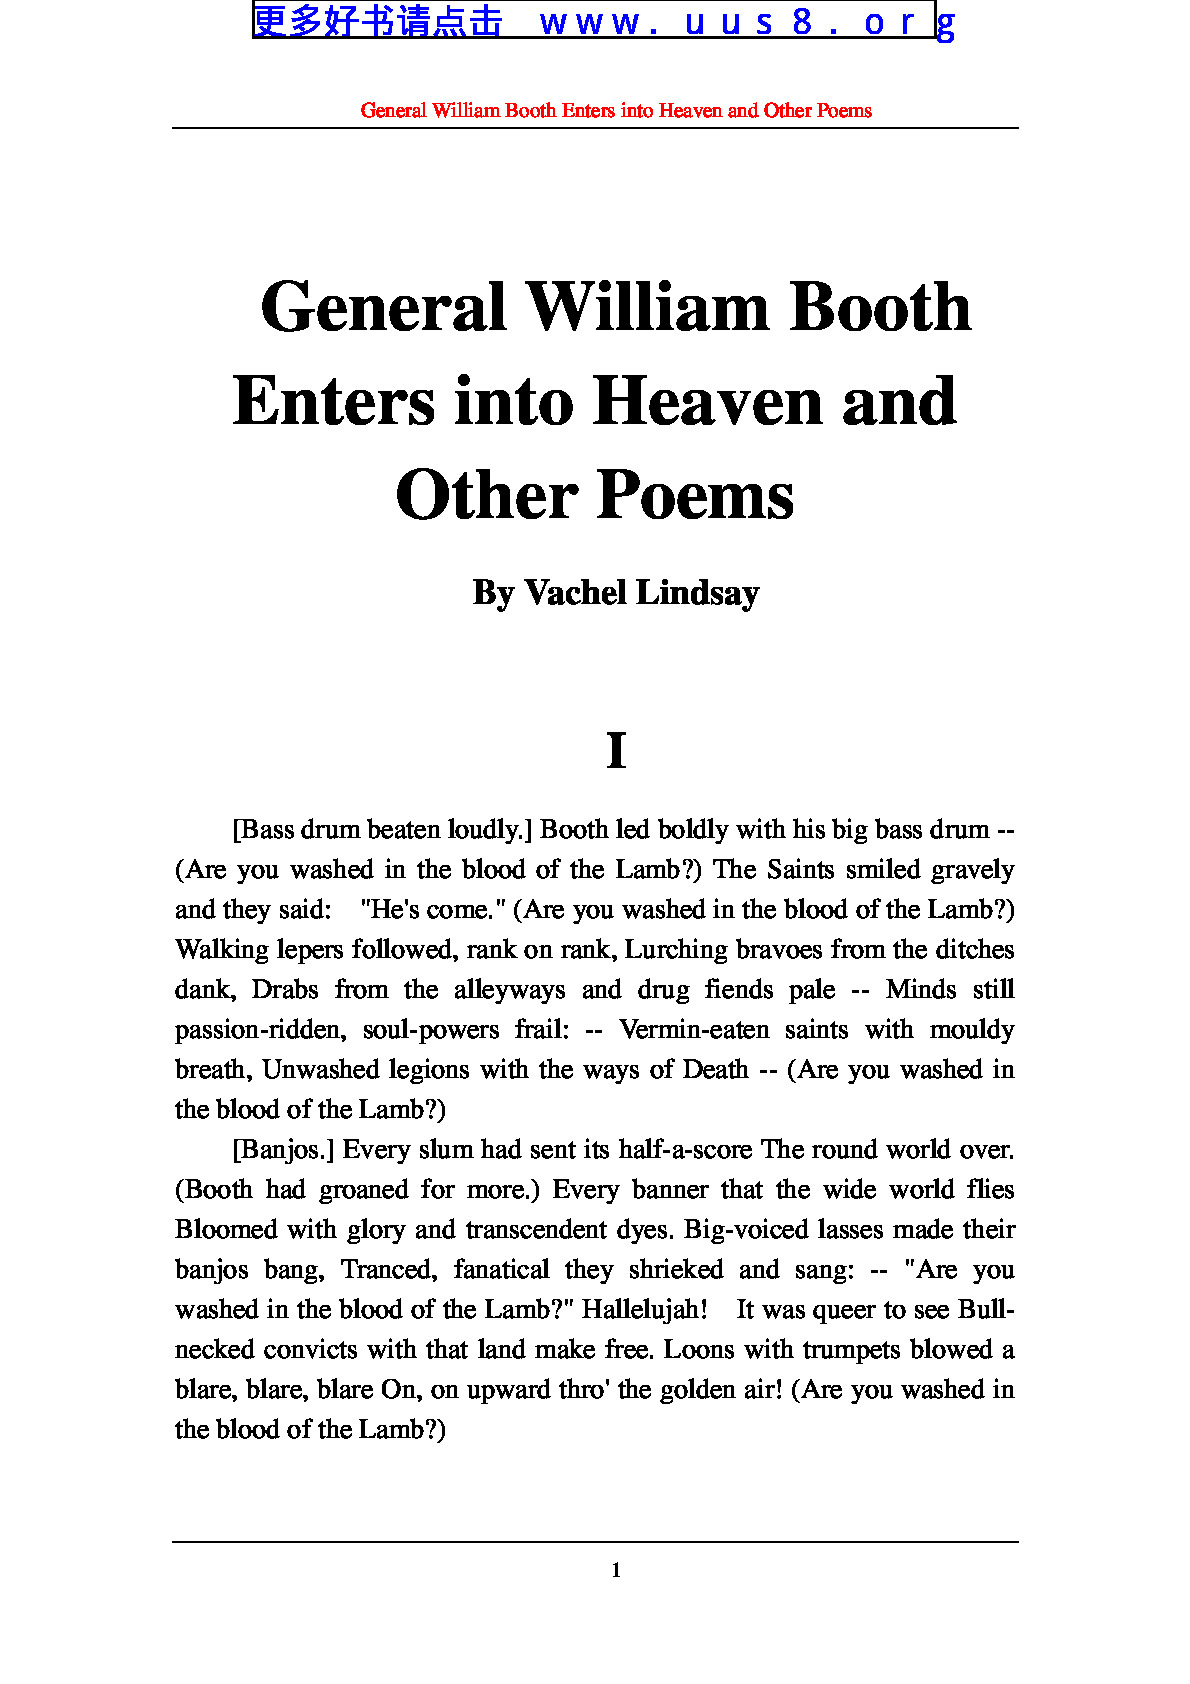 General_William_Booth_Enters_into_Heaven(布斯将军进天堂)